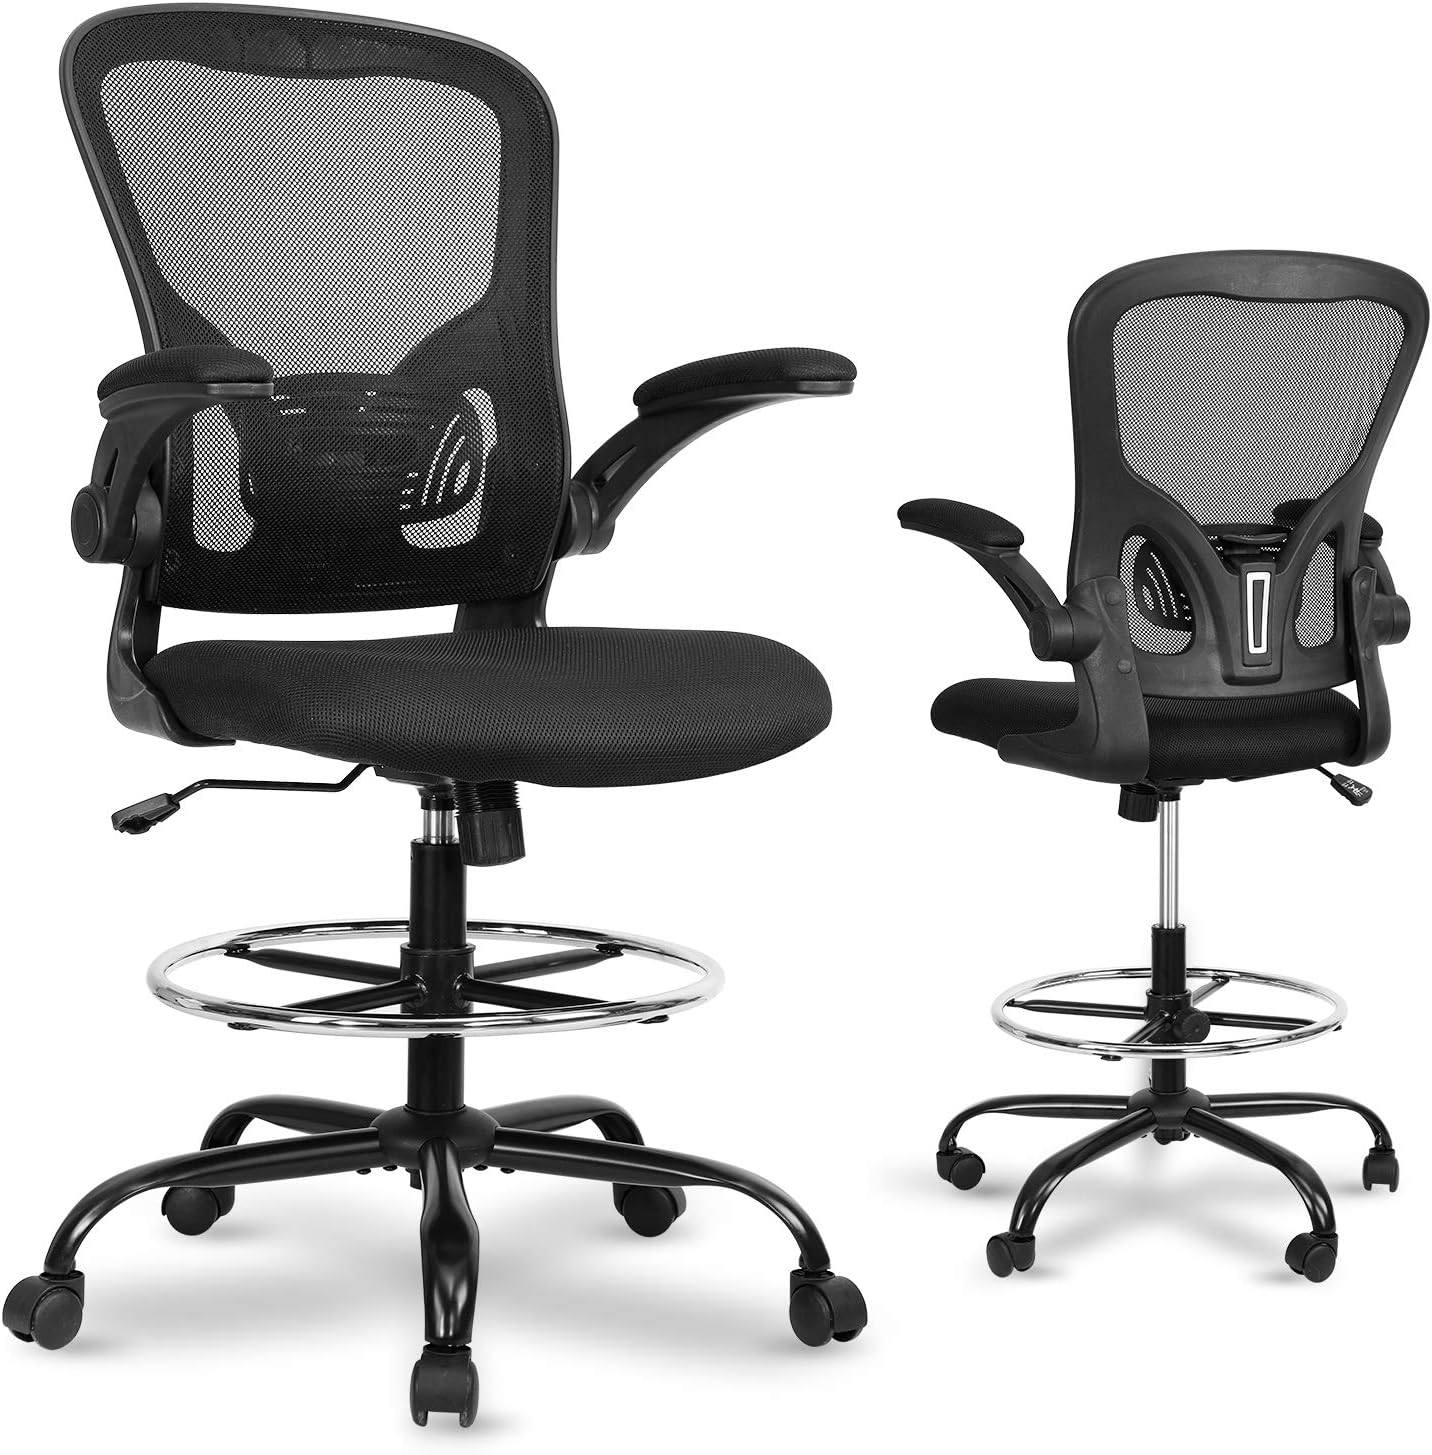 Ergonomic Tall Mesh Drafting Chair With Adjustable Swivel Seat in Black 